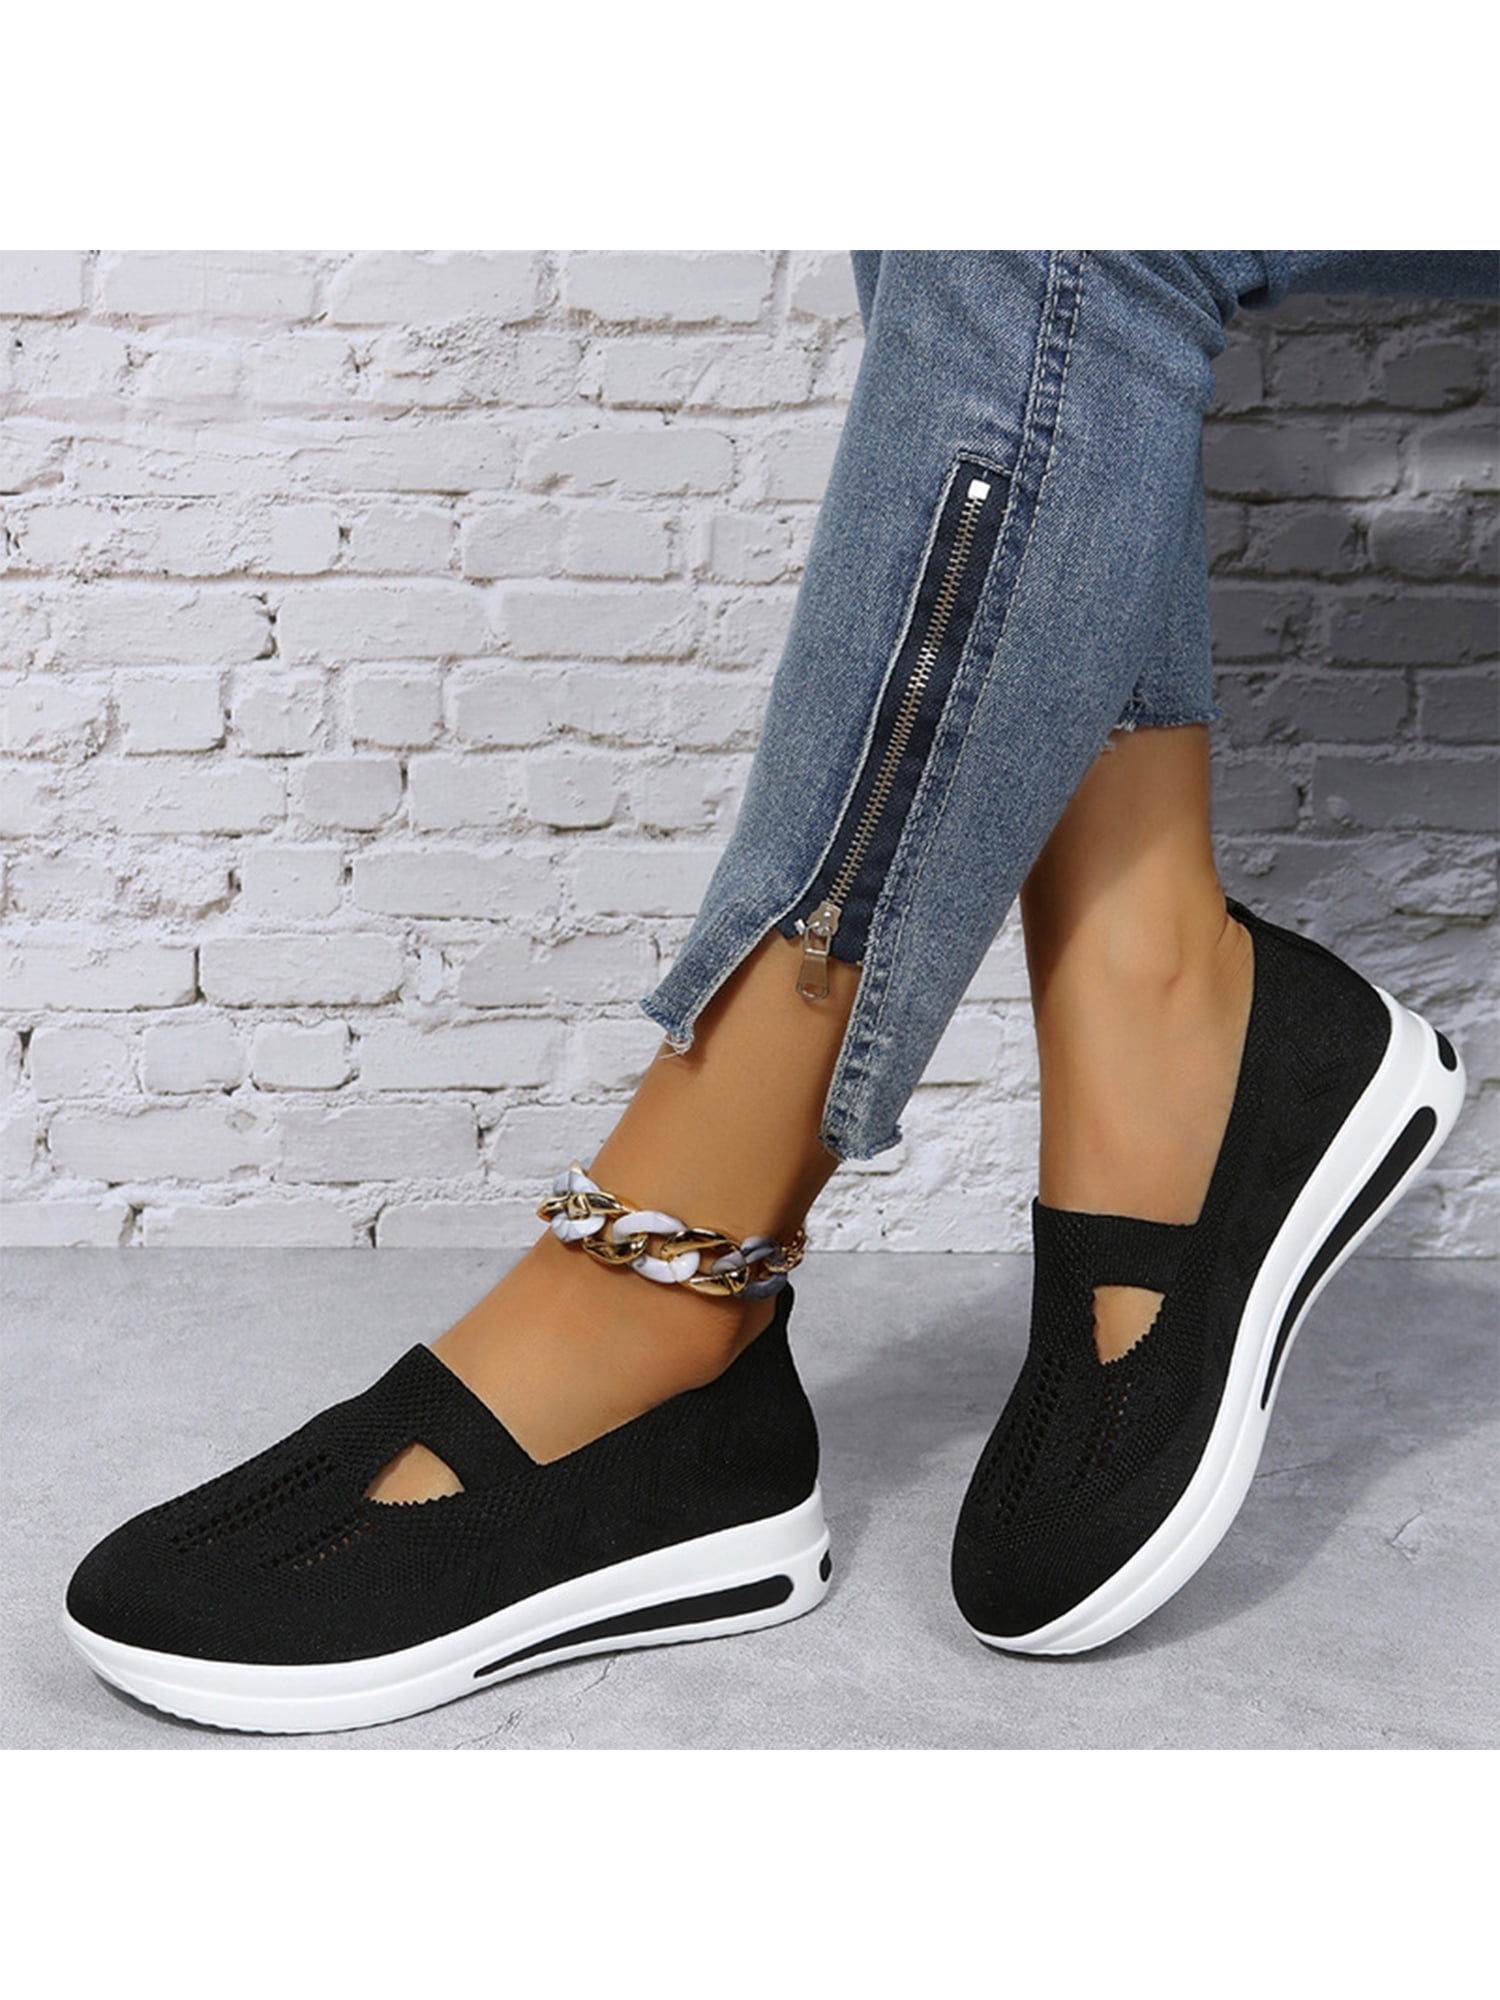 Women Round Toe Flat Running Sneaker Light Slip on Casual Shoes Athletic Loafer 